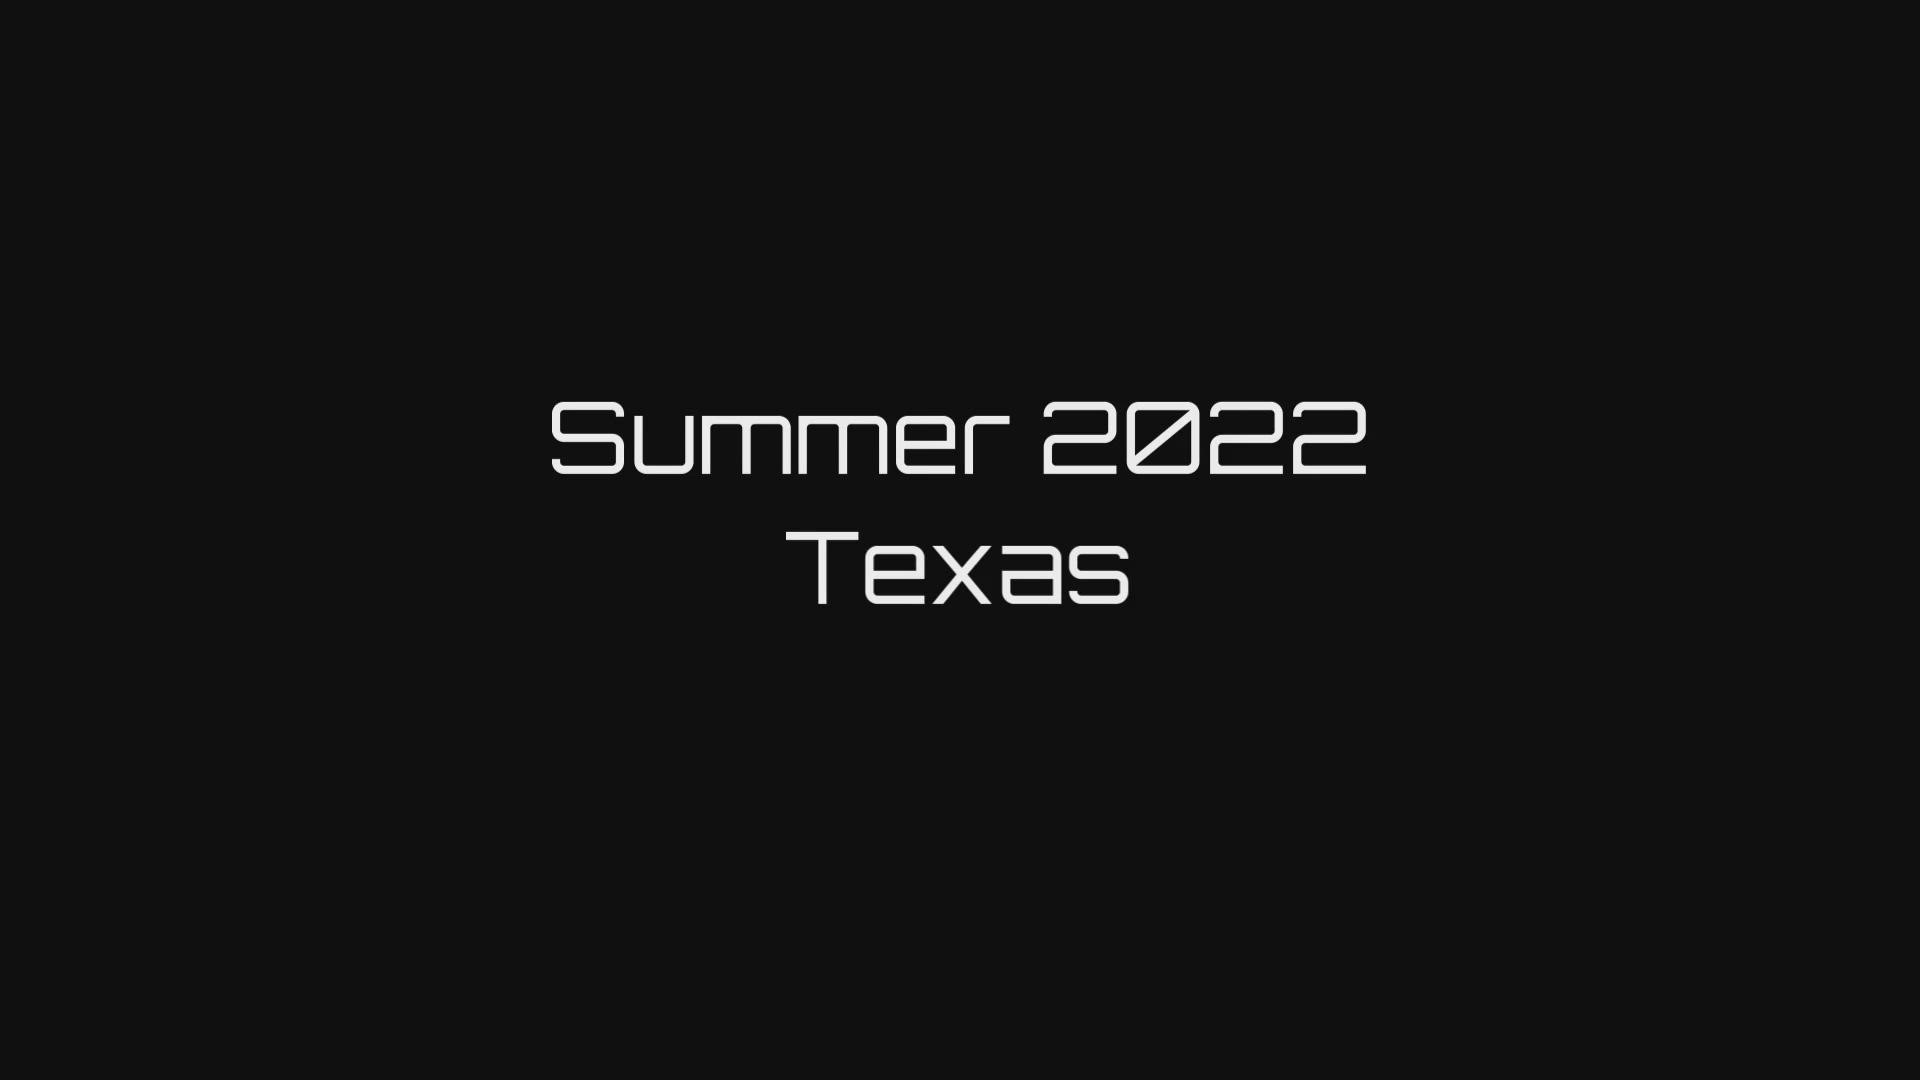 Operation Great Balls of Fire will liberate Texas from this brutal summer, and The Super Squadron was born to handle the heat!